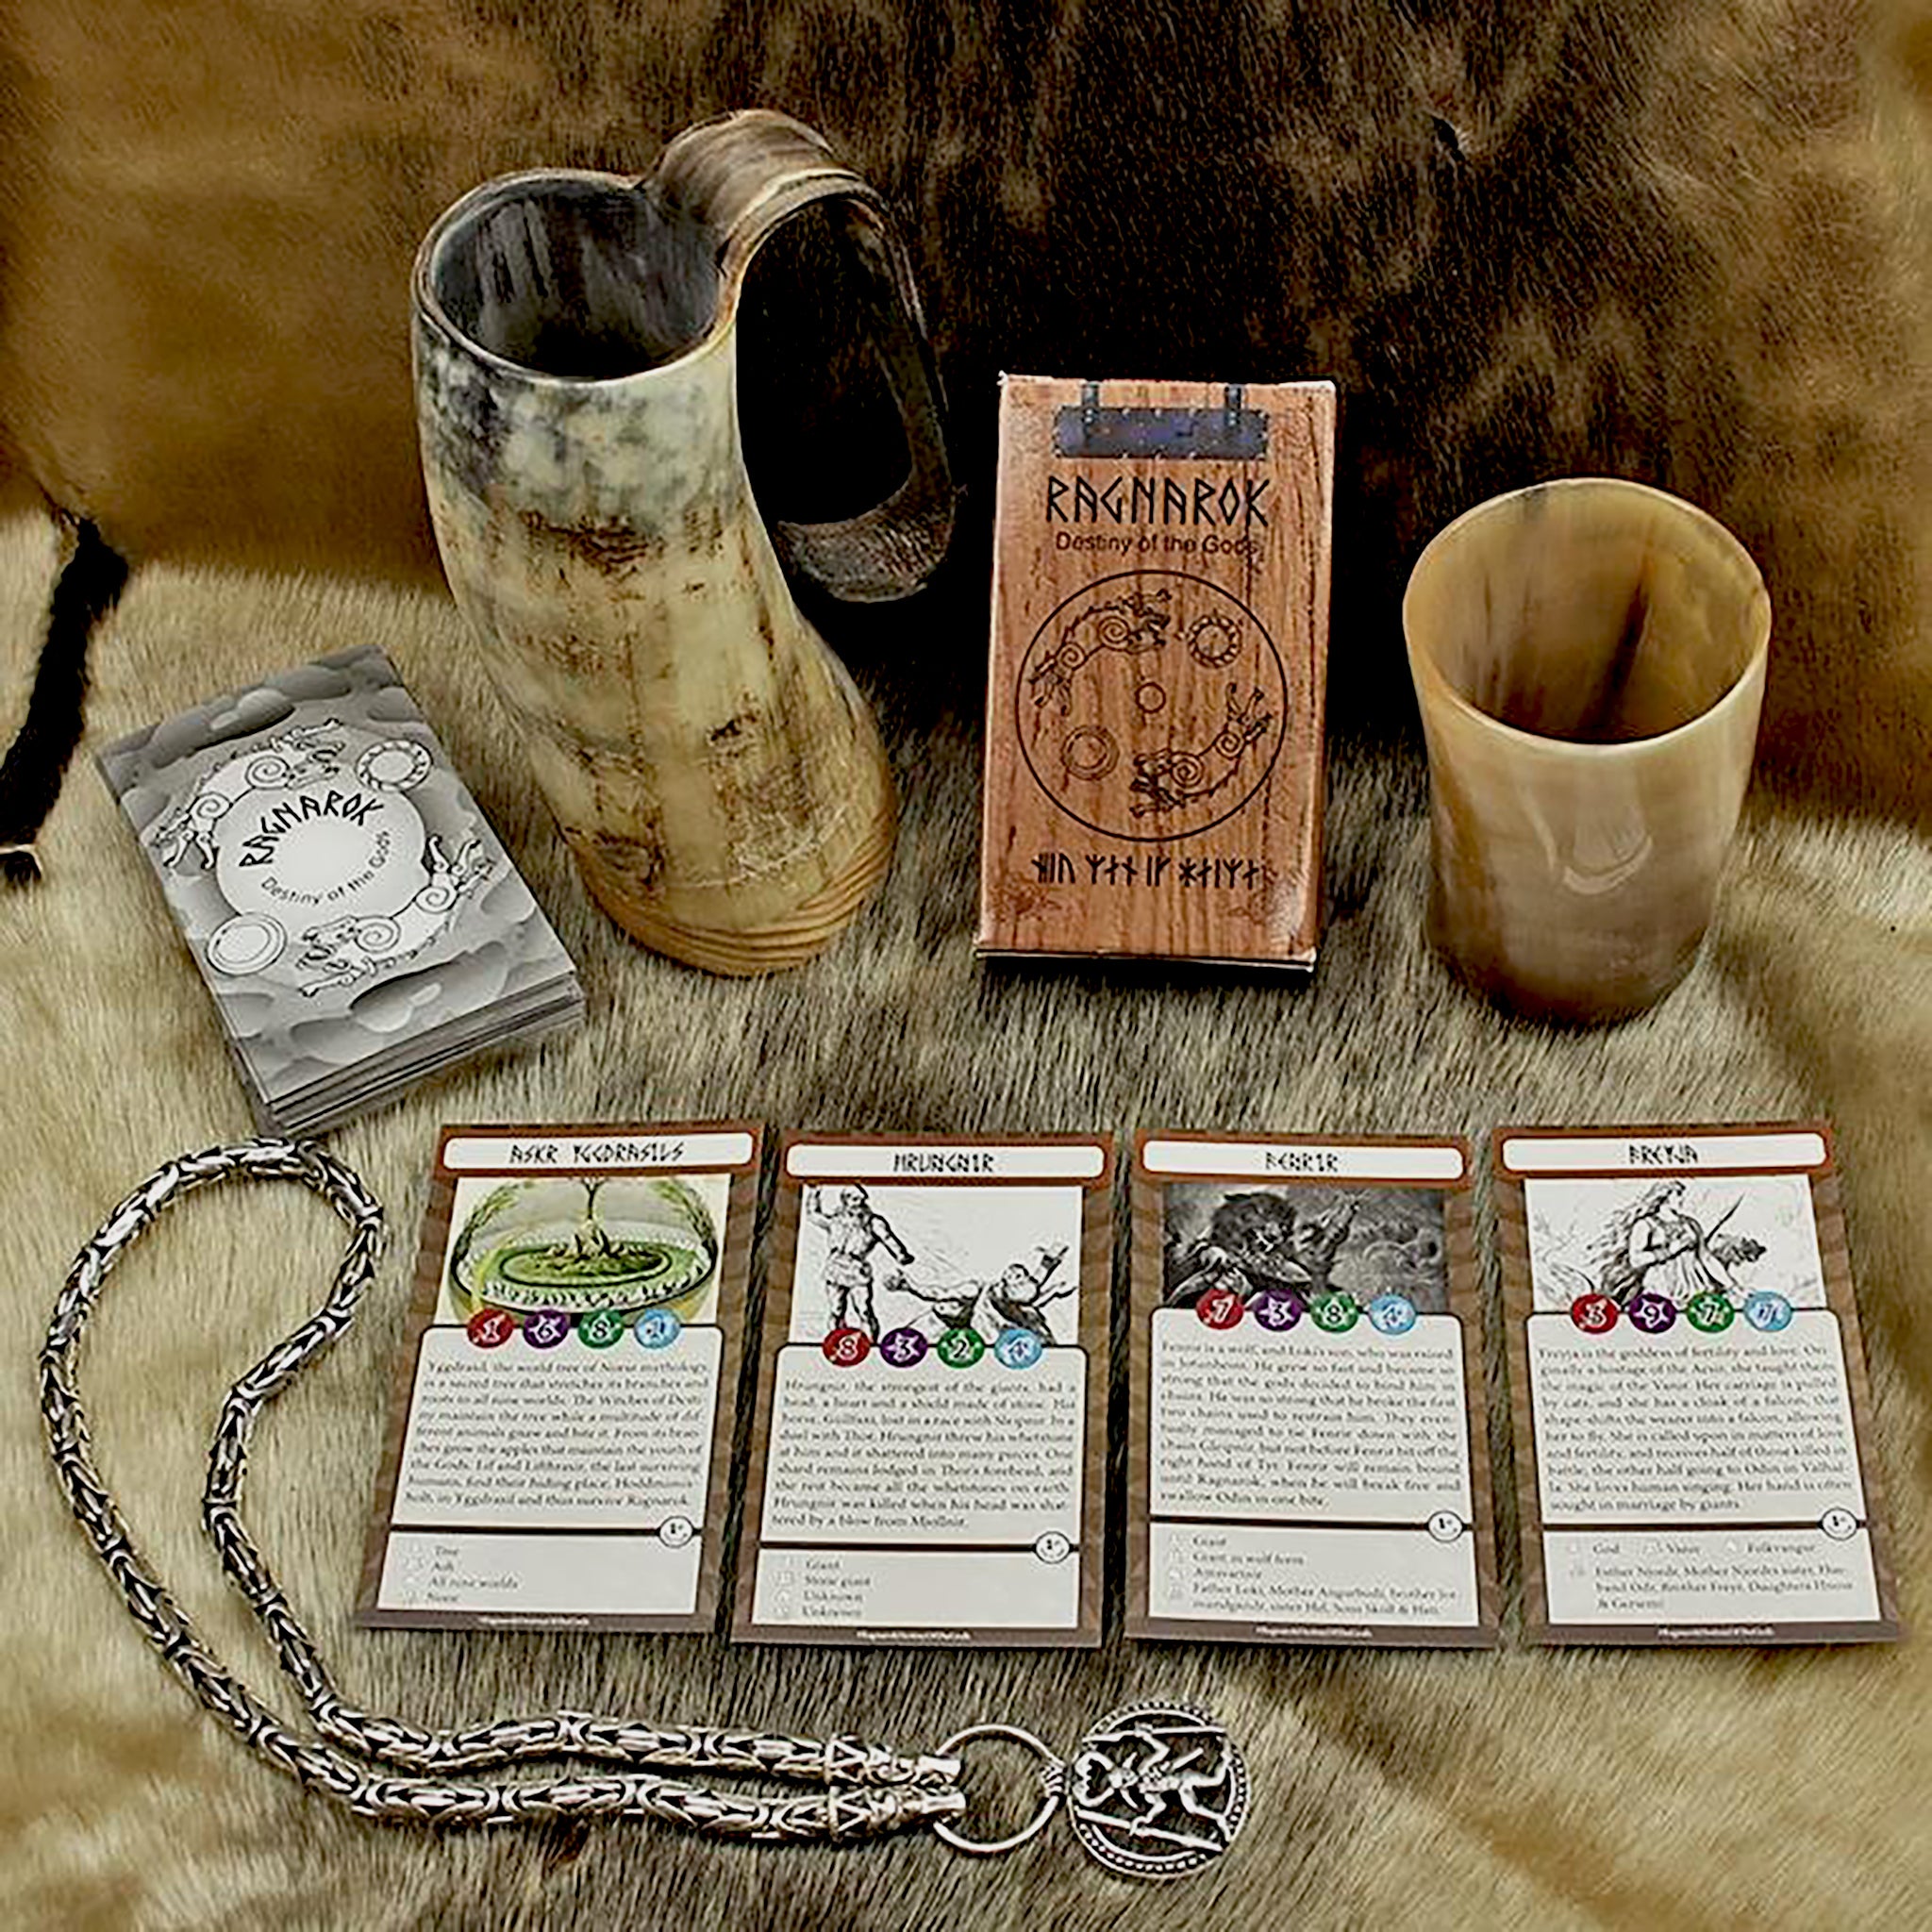 Ragnarok Destiny of the Gods - Norse Mythology Card Game with Horn Mugs and Thors Hammer Necklace Display